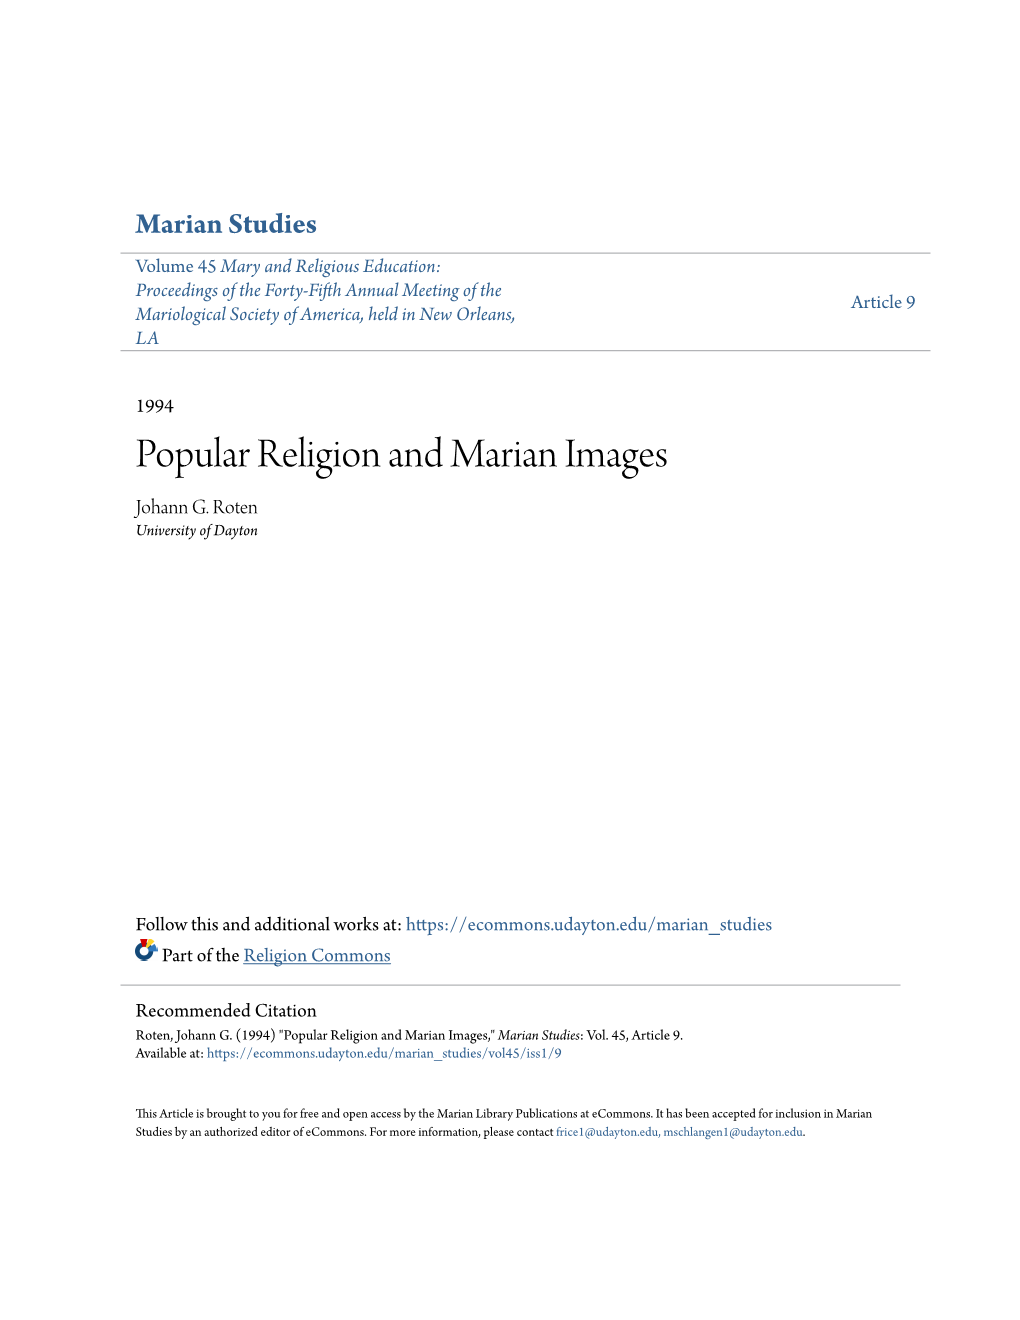 Popular Religion and Marian Images Johann G